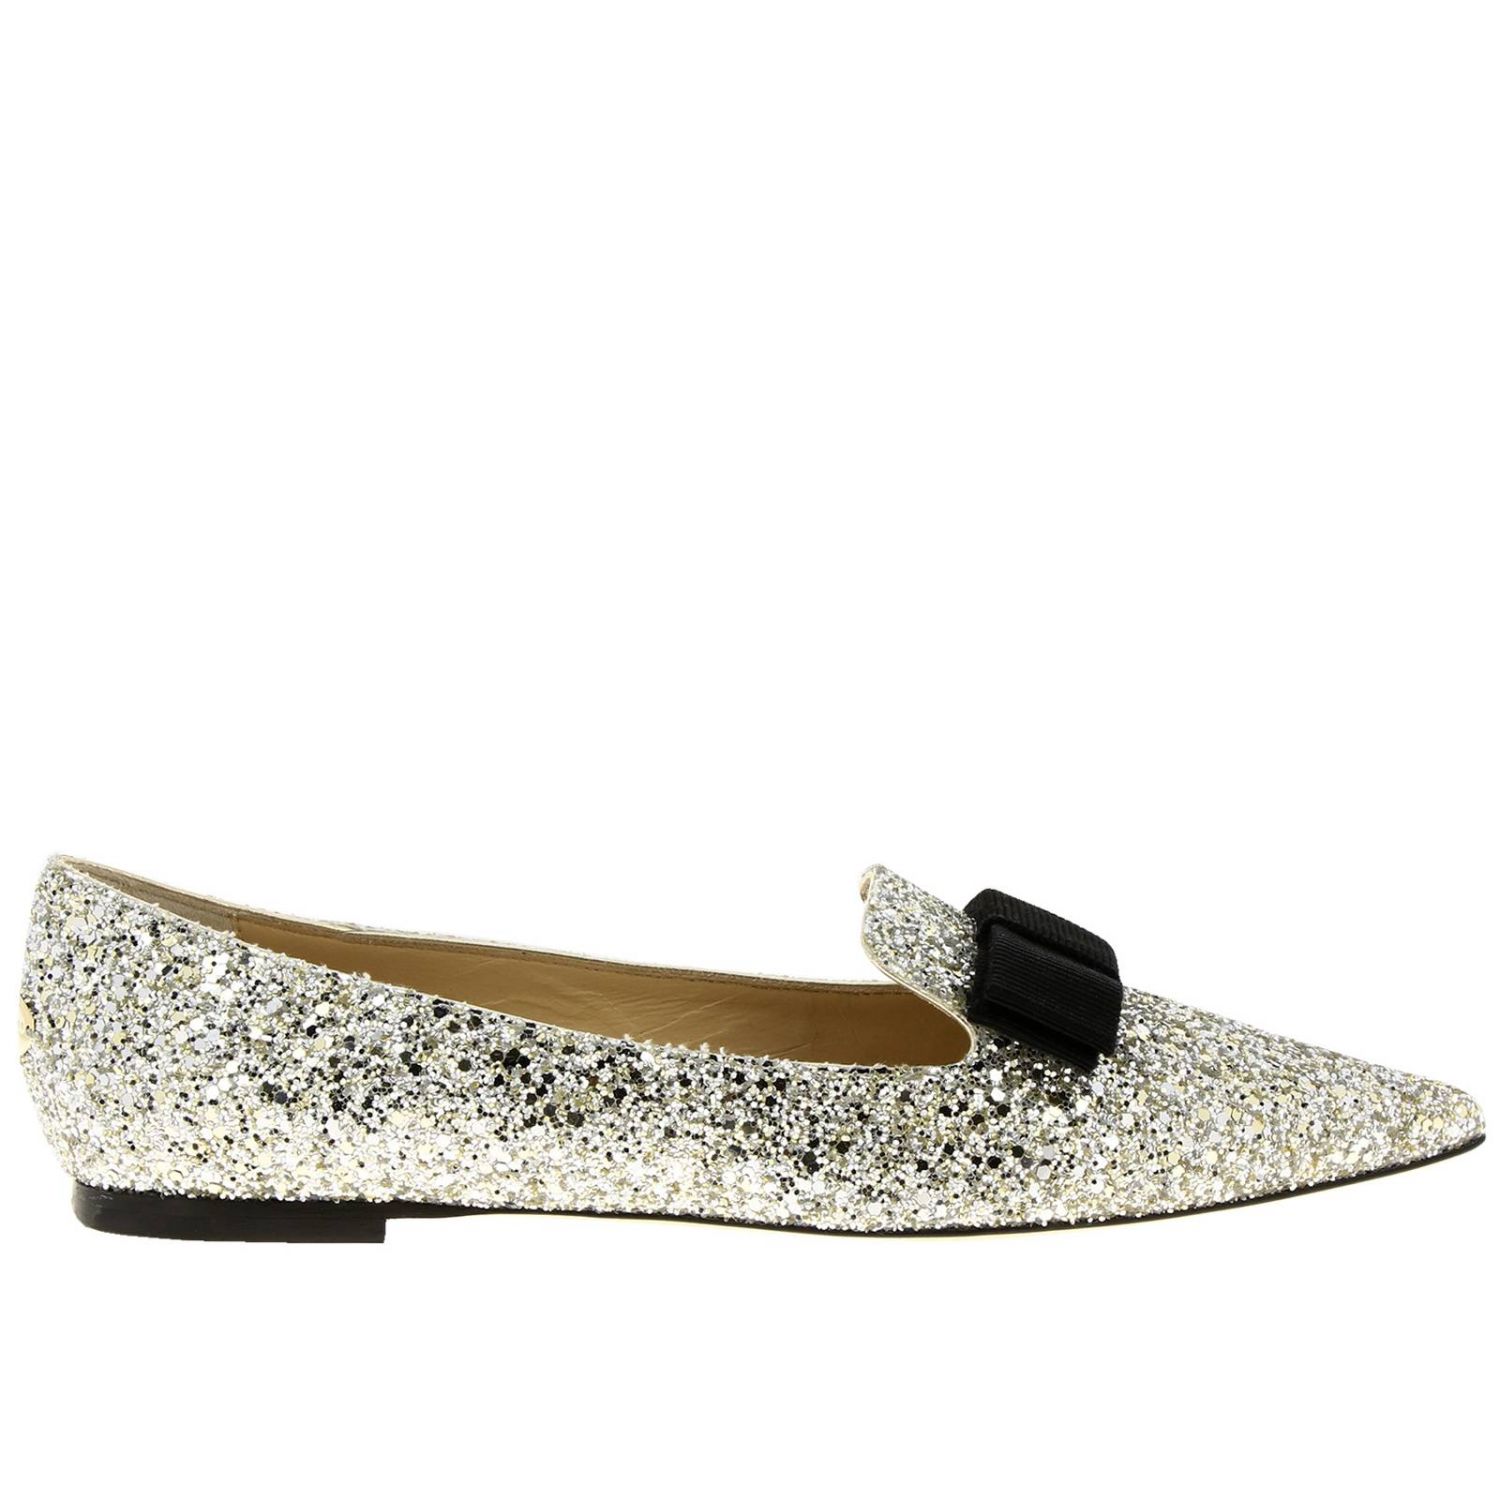 Jimmy Choo Outlet: glitter gala ballerina with bow - Silver | Ballet ...